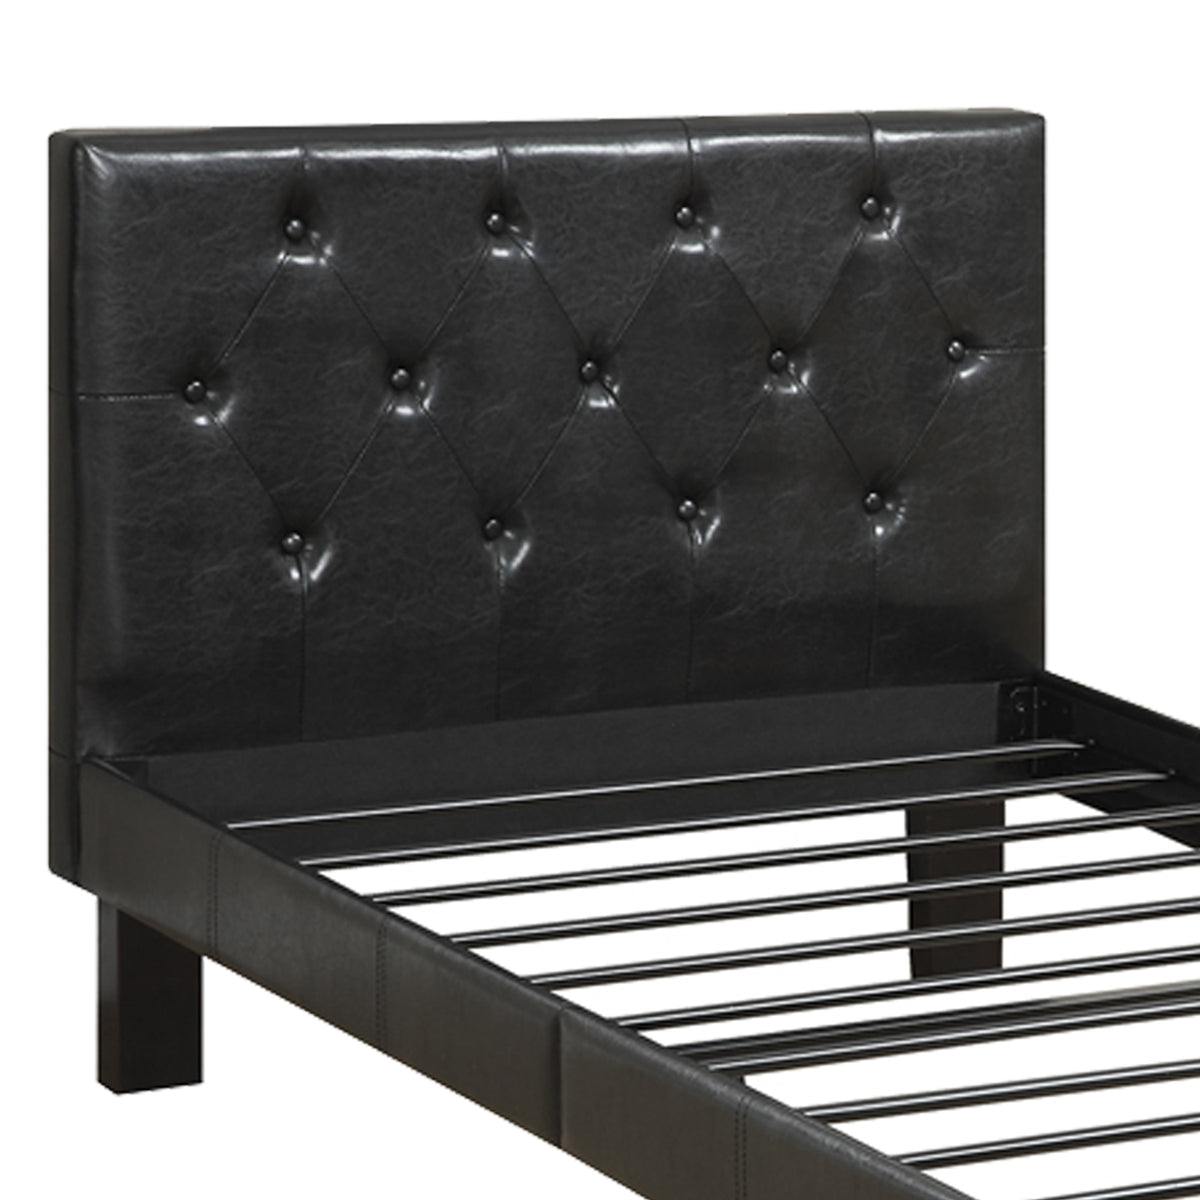 BM171746 Faux Leather Upholstered Full size Bed With tufted Headboard, Black